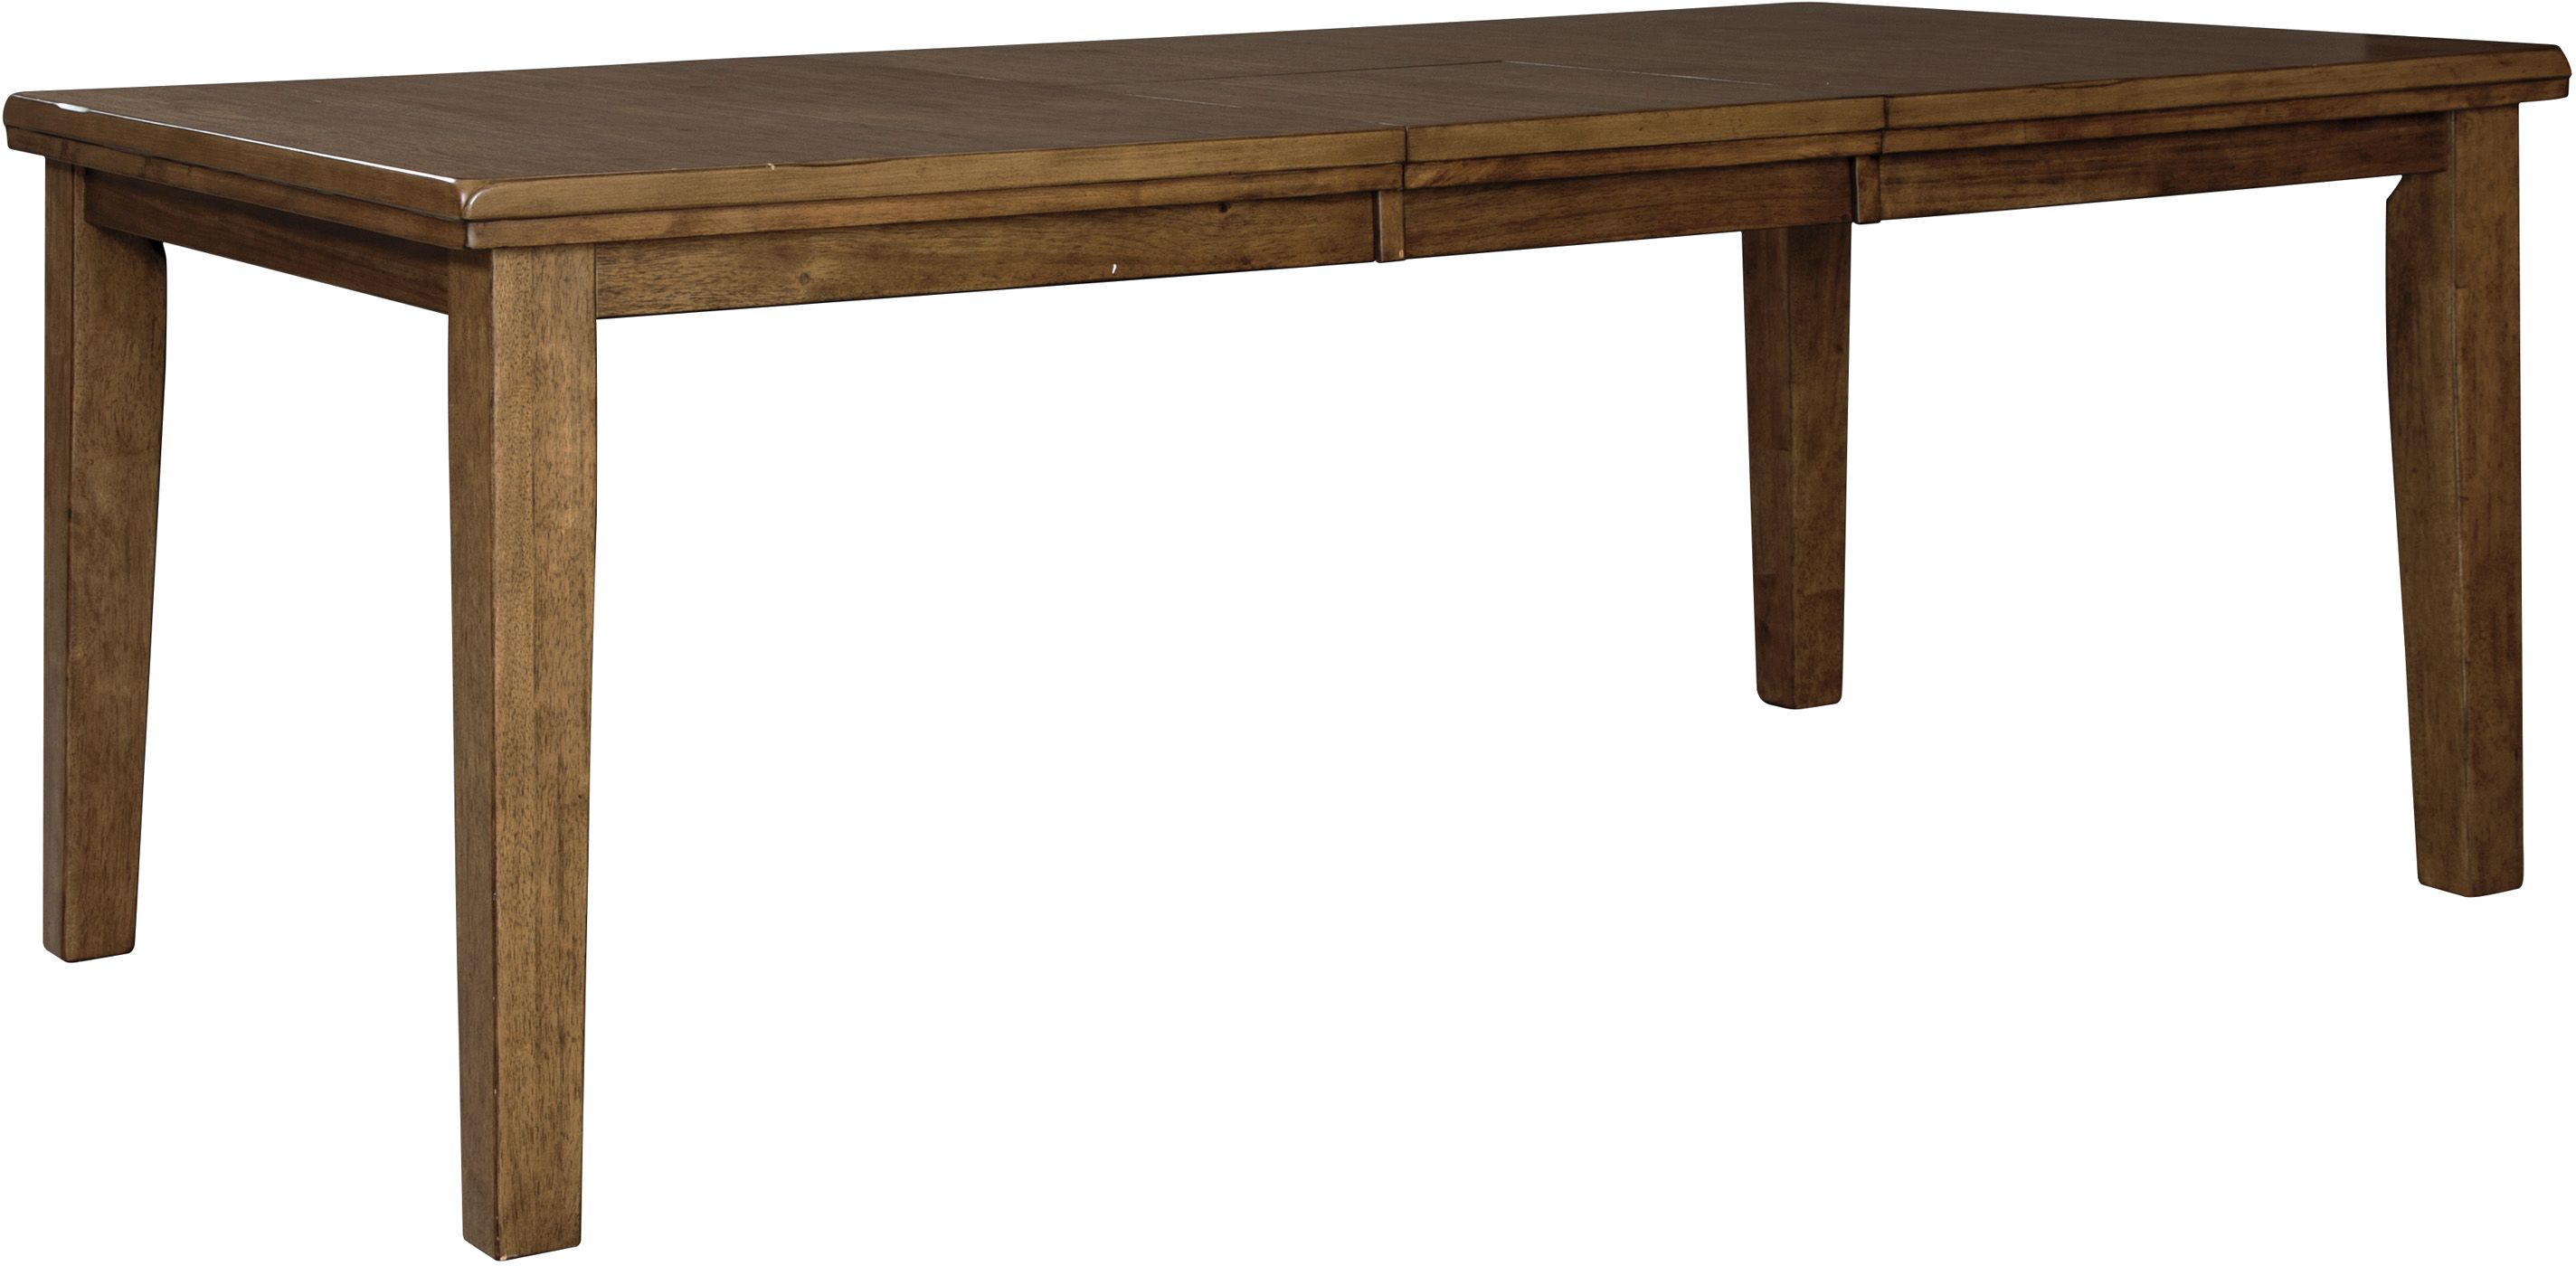 Benchcraft® Flaybern Brown Rectangular Dining Room Butterfly Extension Table